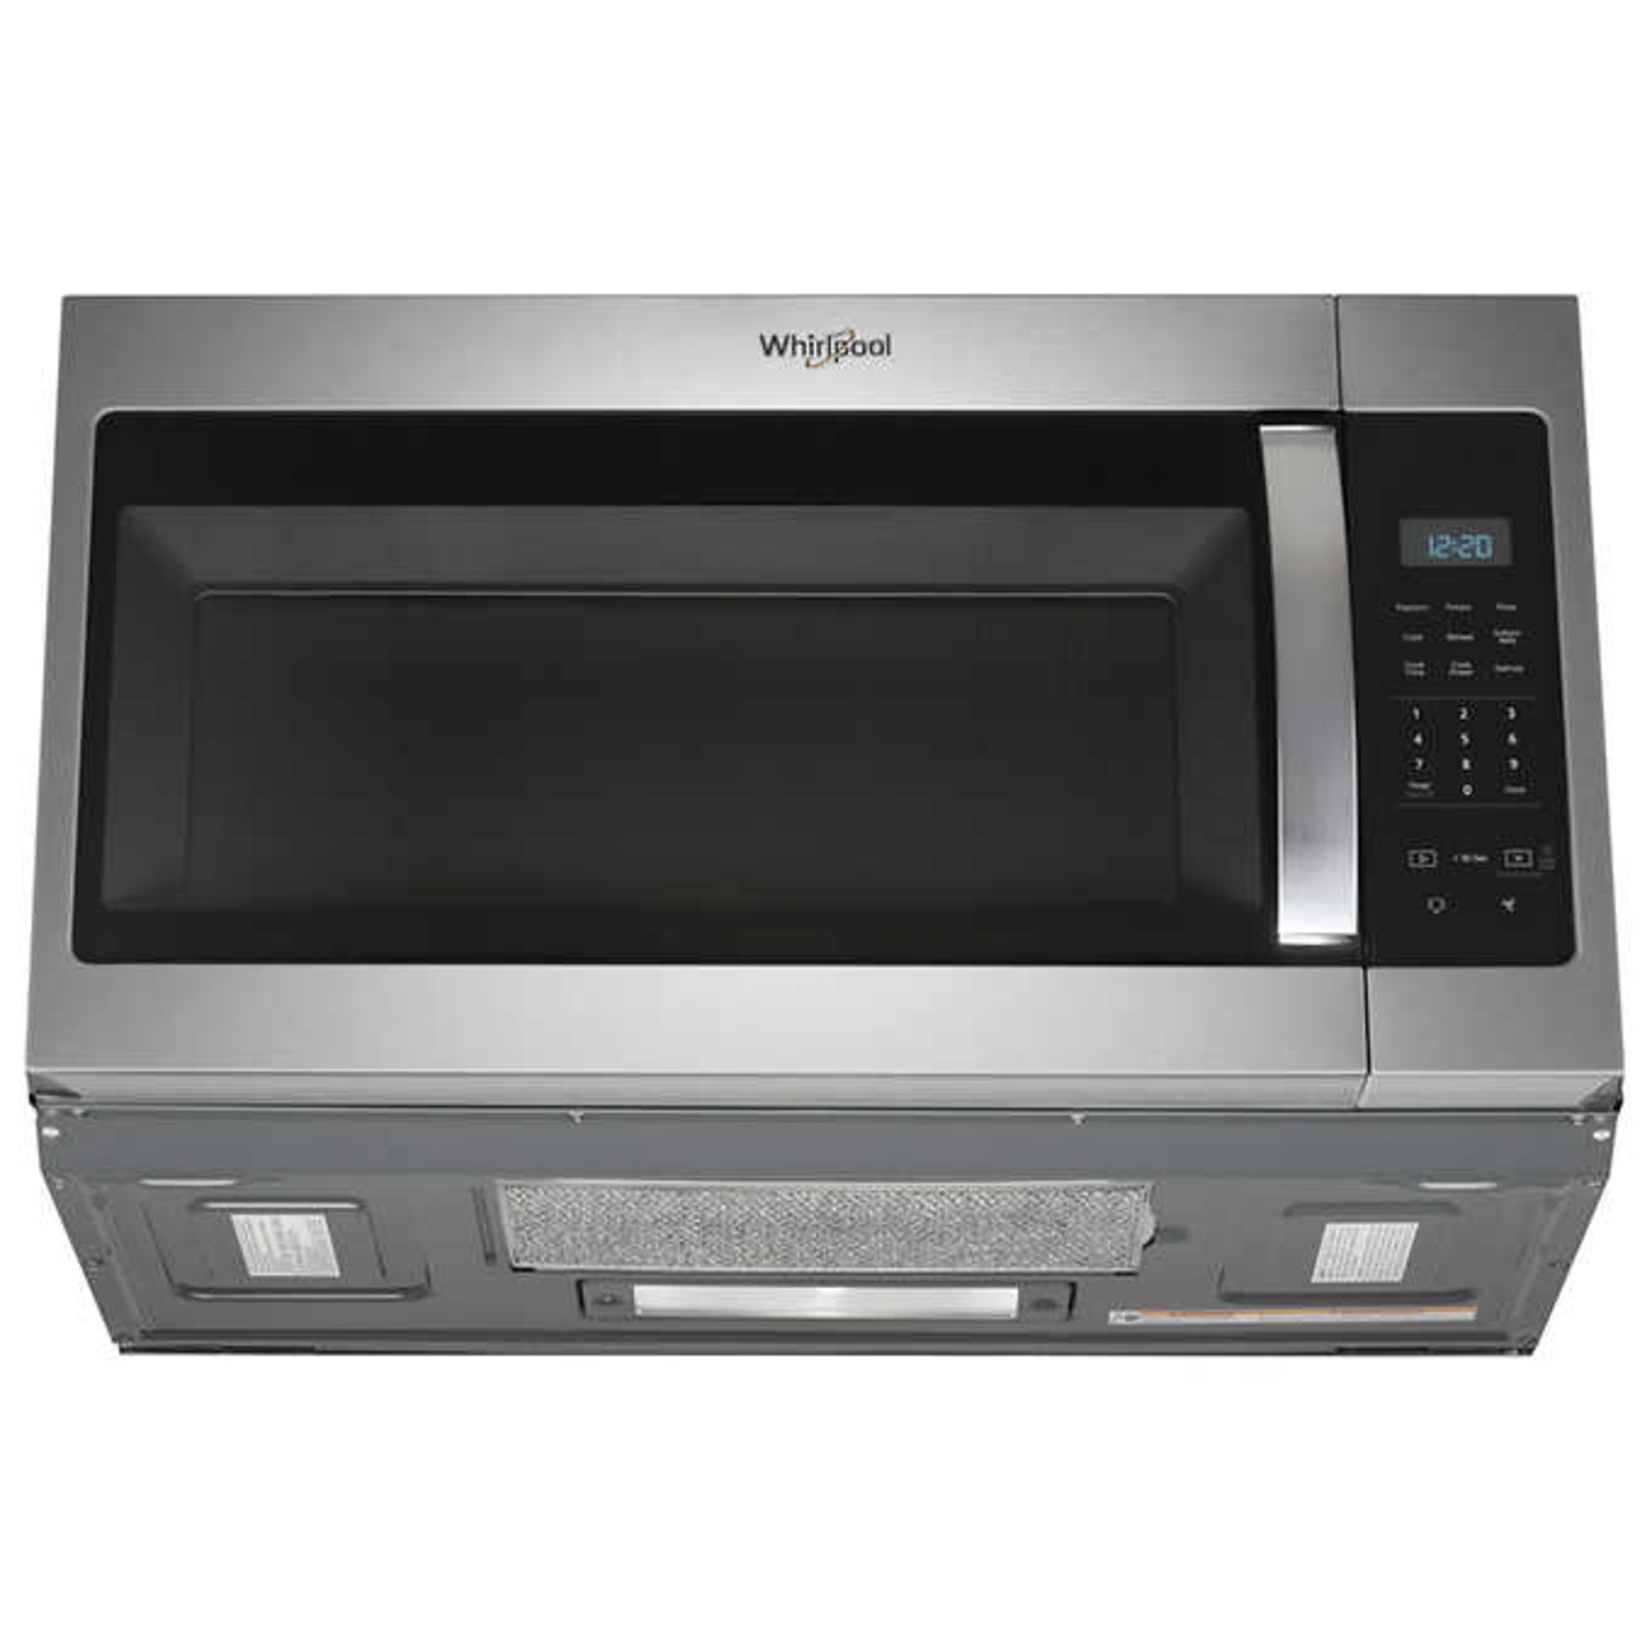 Whirlpool 1.7 cu ft. Stainless Steel Over-the-Range Microwave with Electronic Touch Controls - 330 CFM